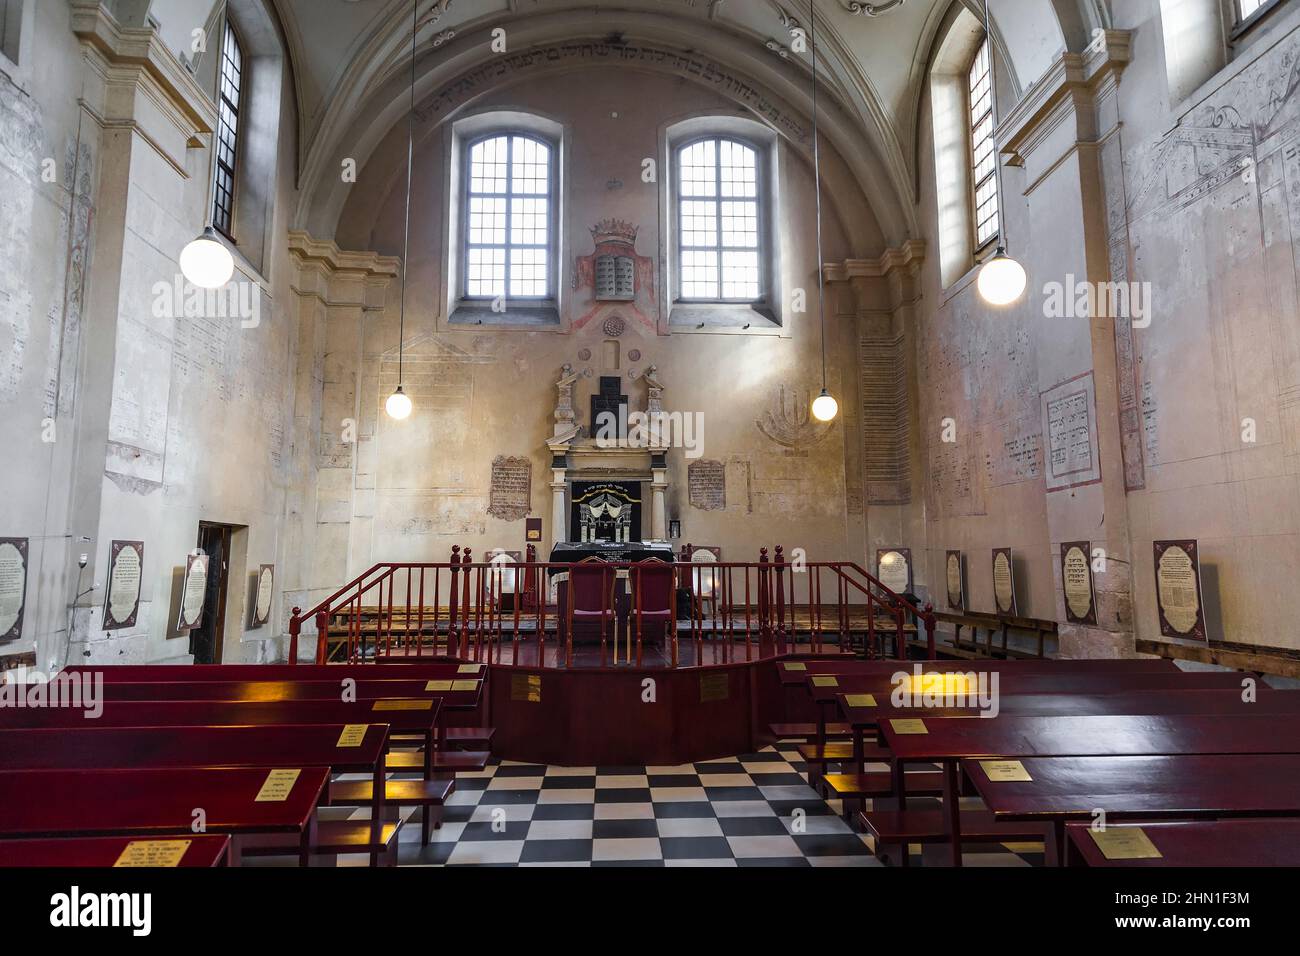 The Isaak synagogue (Isaac Synagogue) was built in 1664, located in the old quarter of the city - Kazimierz, is one of the most beautiful synagogues i Stock Photo